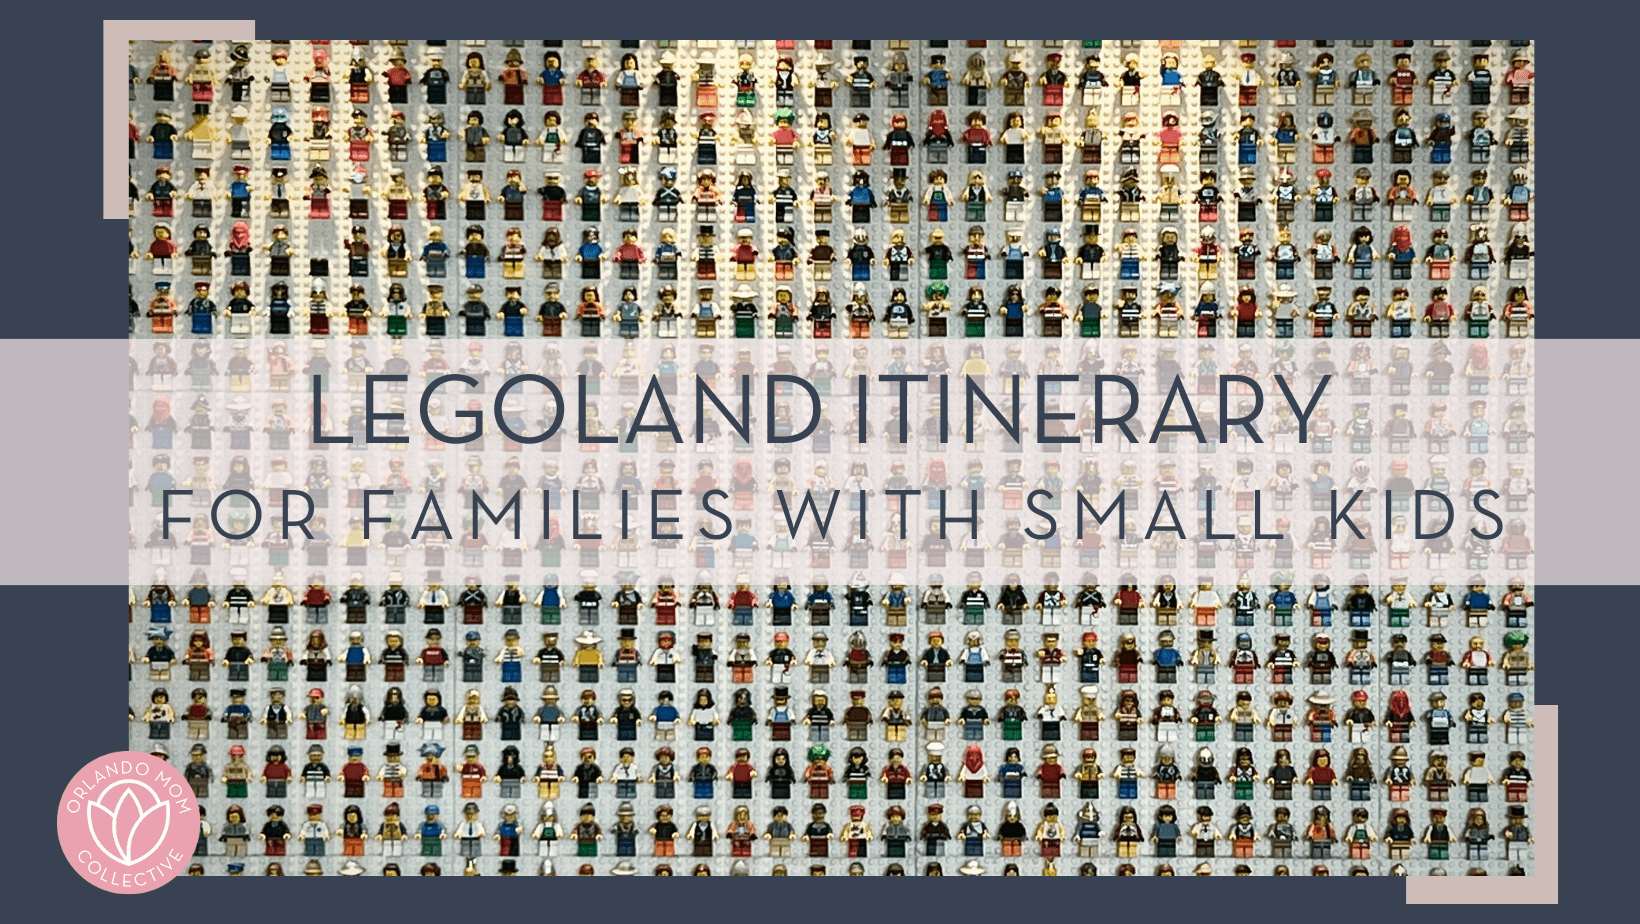 James Qualtrough via unsplash image with lego men in rows with 'Legoland itinerary for families with little kids' in text over top of it.